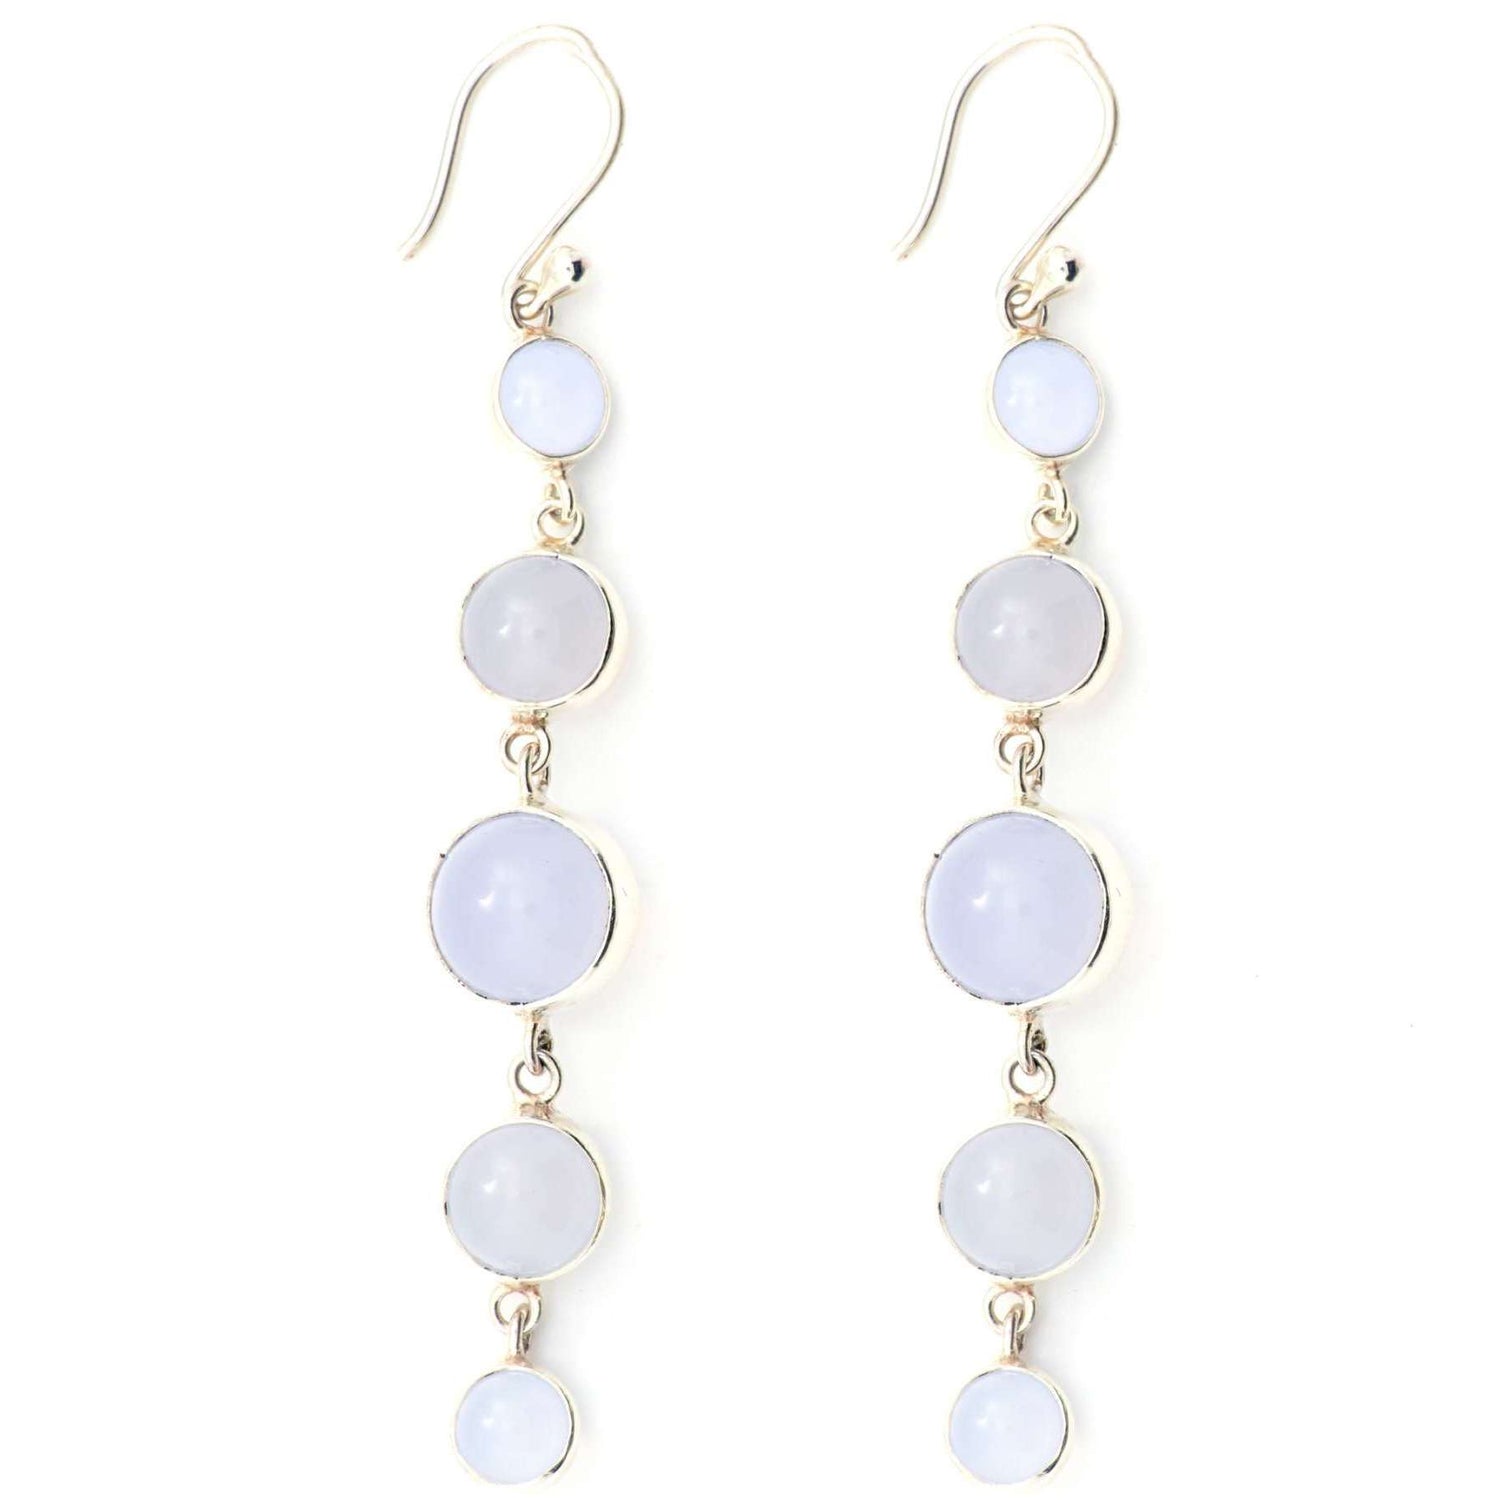 Magnificent Earhooks Featuring Peaceful Harmony Chalcedony - Find Your Perfect Pair Today!